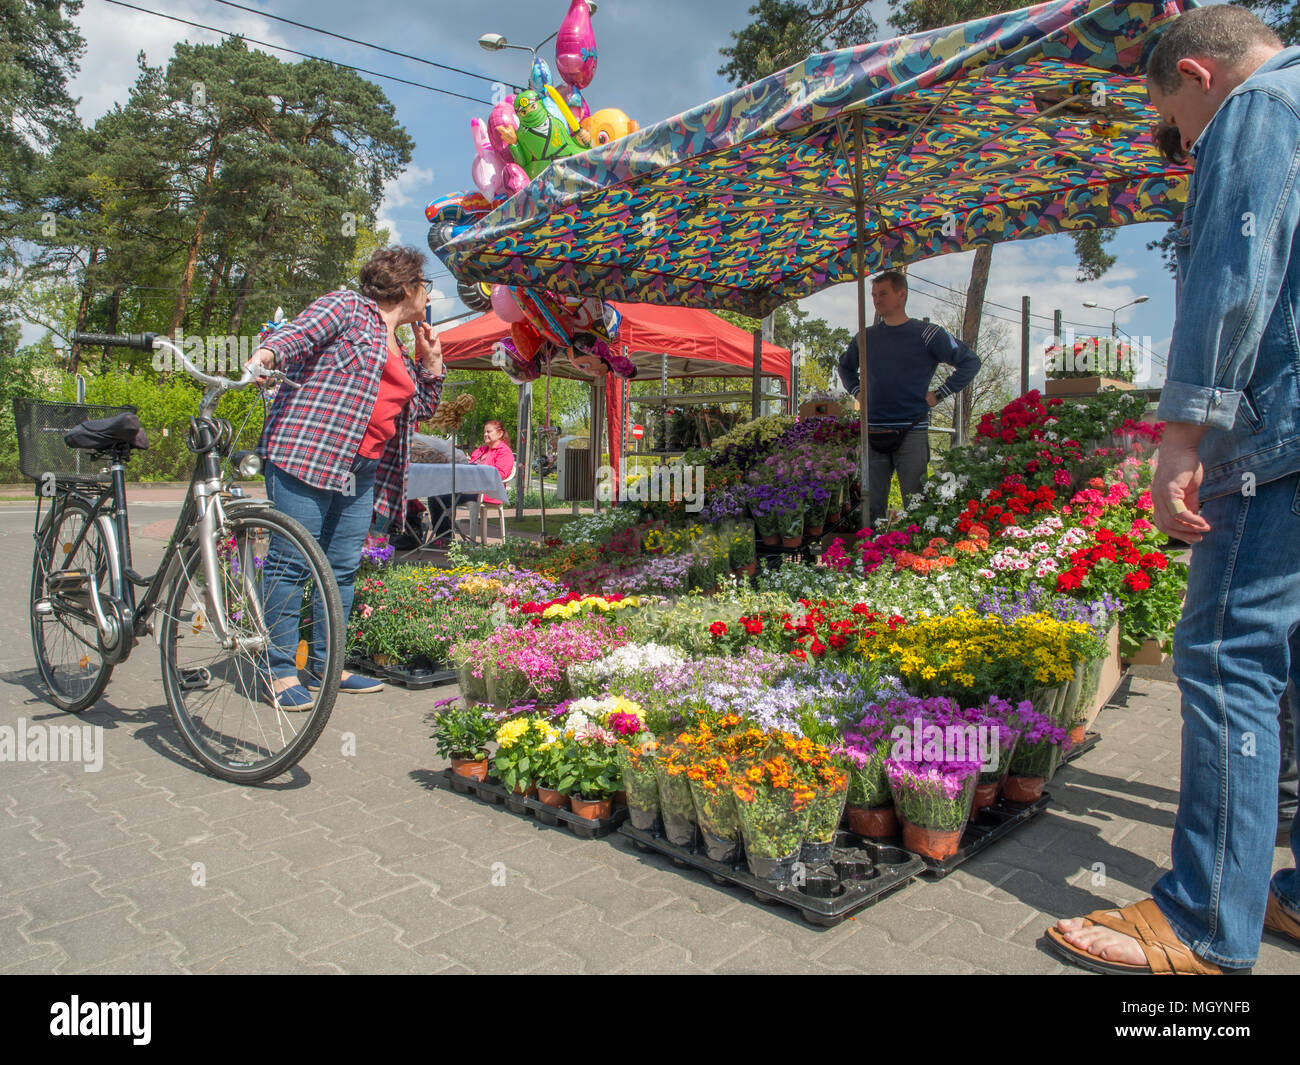 Jozefow, Poland - May 14, 2017: Spring flowers market with plenty of different, colorful plants Stock Photo